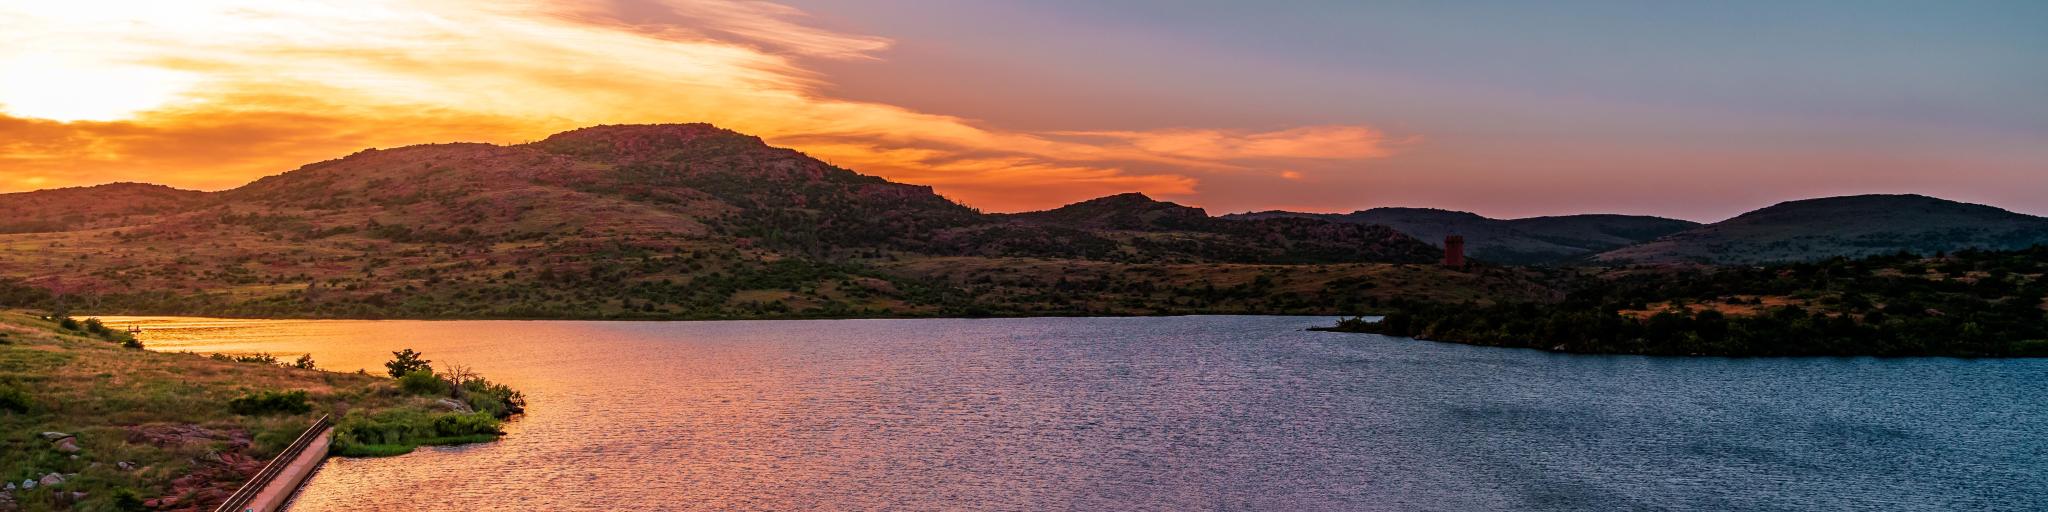 Wichita Mountain Wildlife Preserve, Oklahoma, United States with rock formations in the foreground, a large lake and mountains in the distance at sunset.